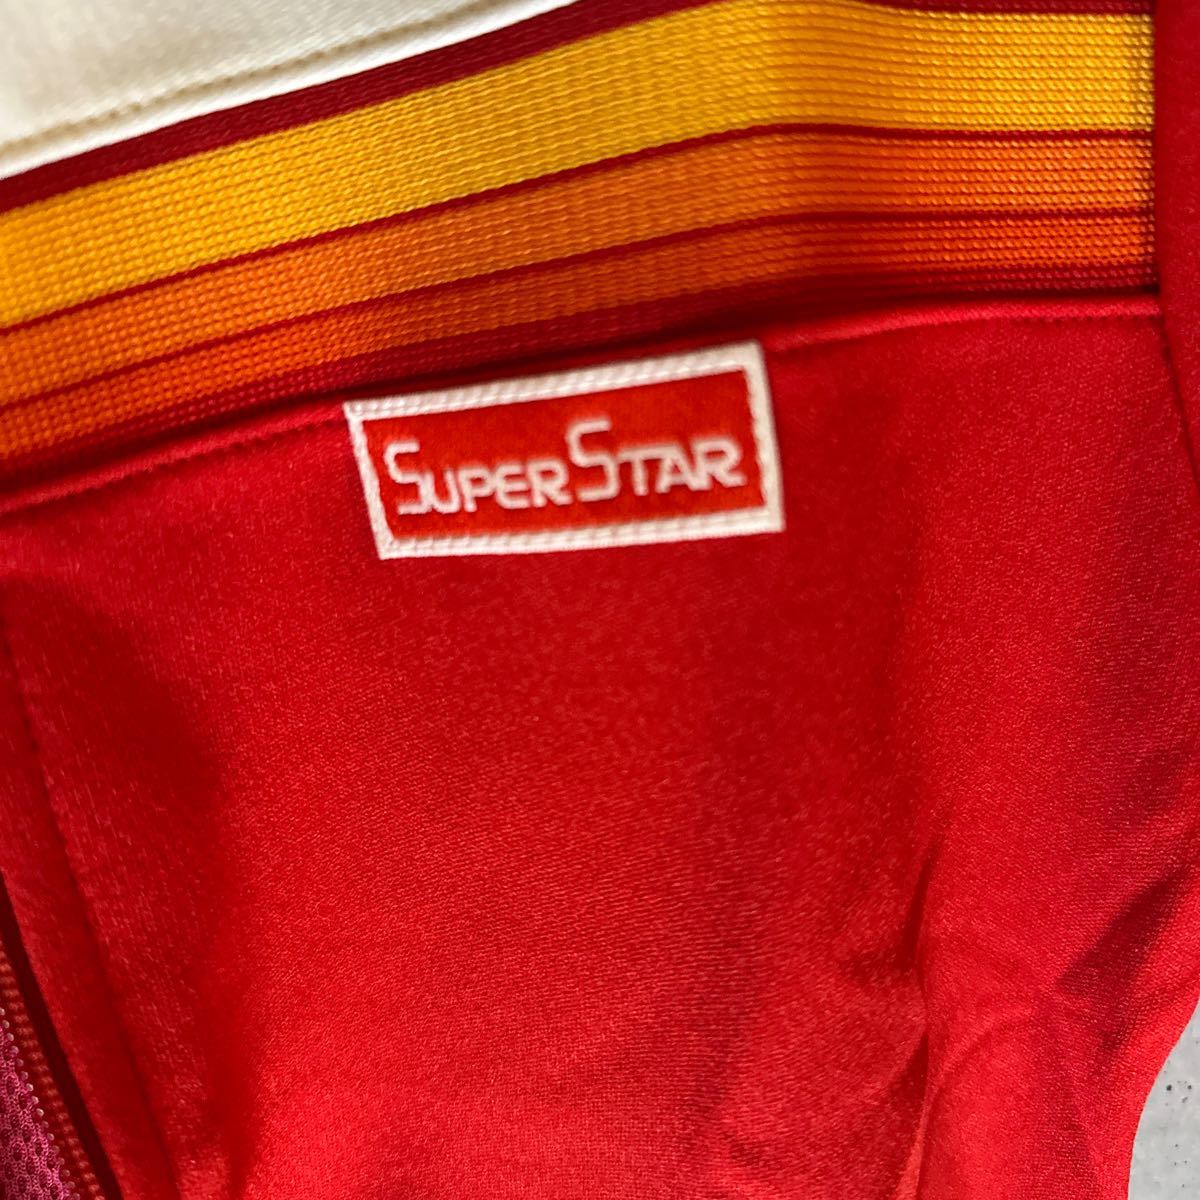  beautiful Tsu . made jersey jersey super Star 70~80 period dead stock unused goods Showa Retro Vintage old tag made in Japan 